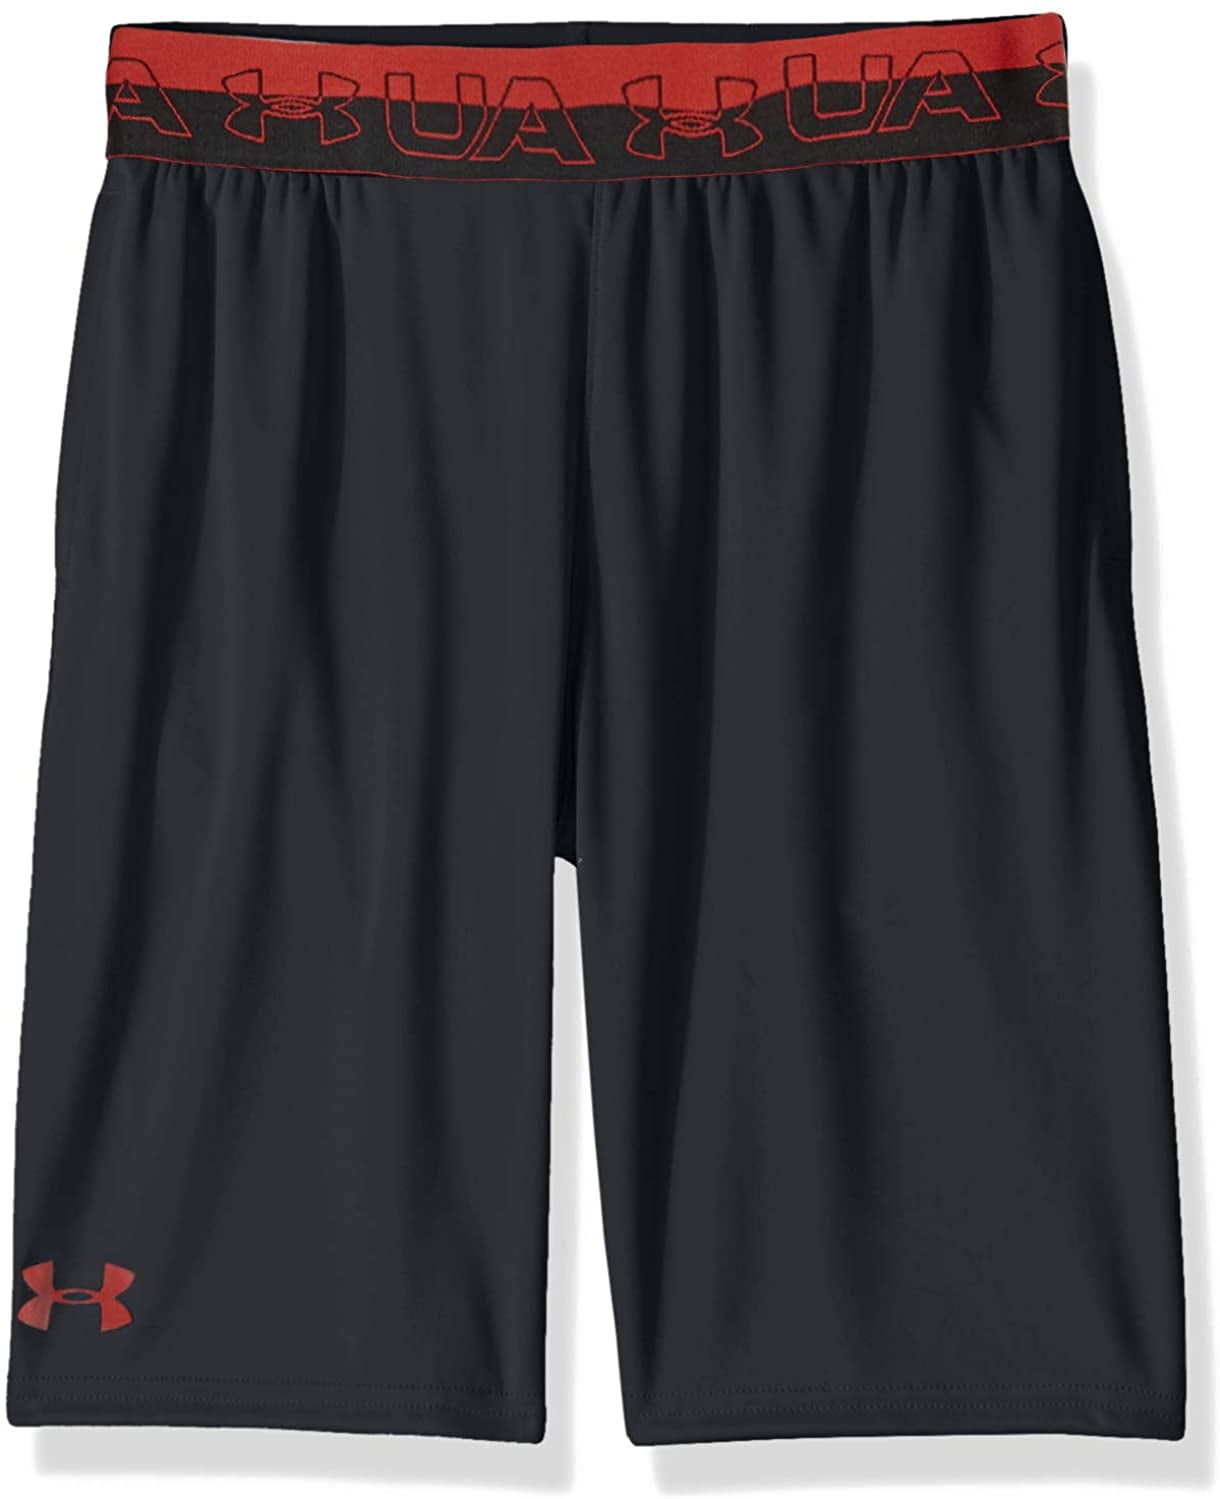 black and red under armour shorts